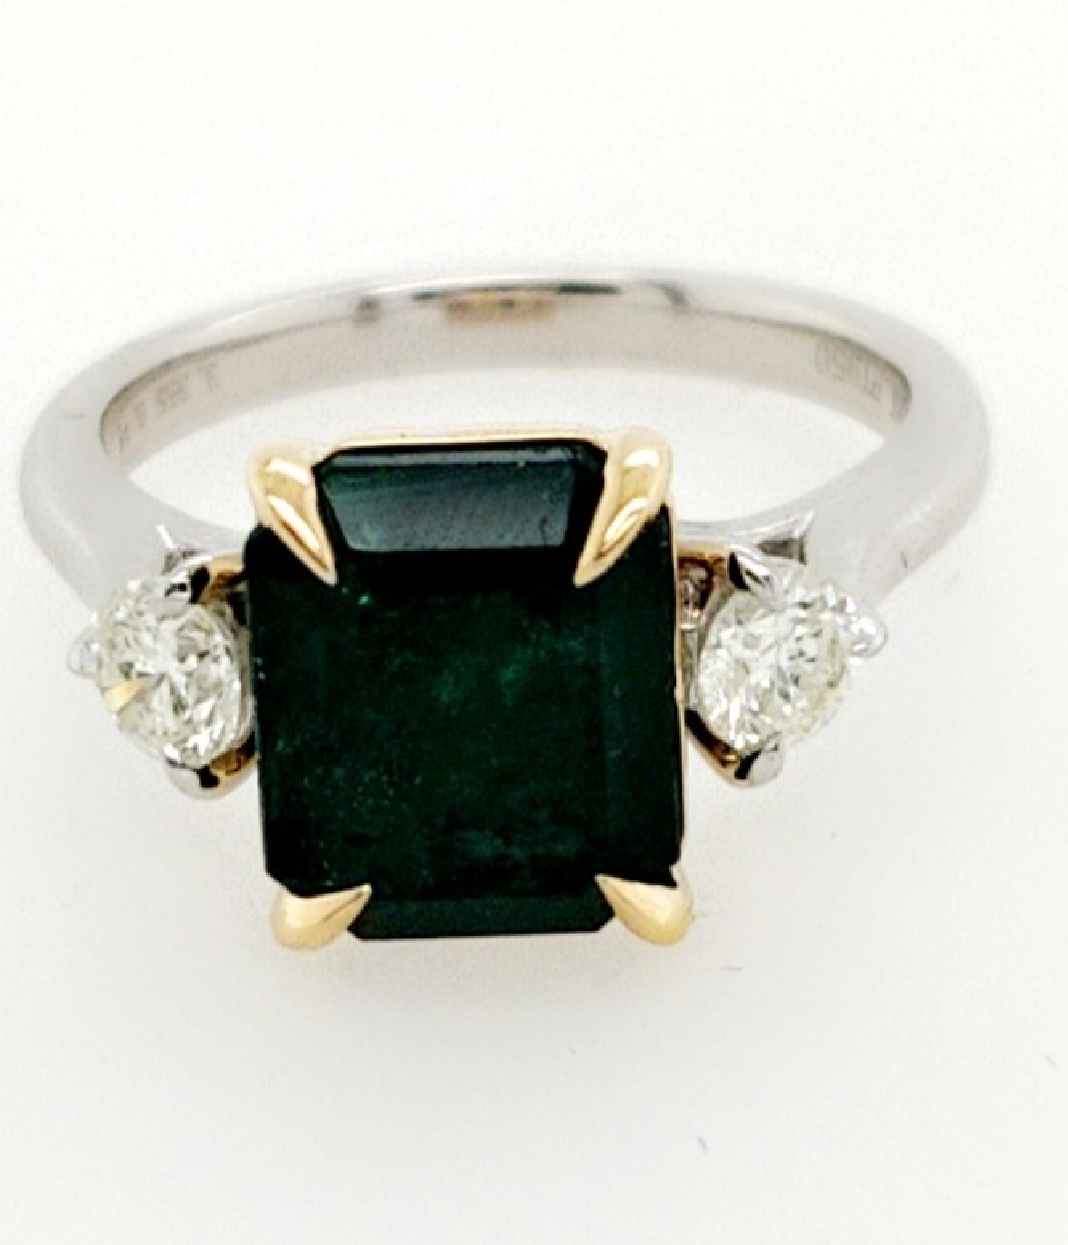 18 Yellow Gold and Platinum Emerald Ring with 2.51 Ct Emerald Cut Stone and 0.38 Ct Diamond Accents 